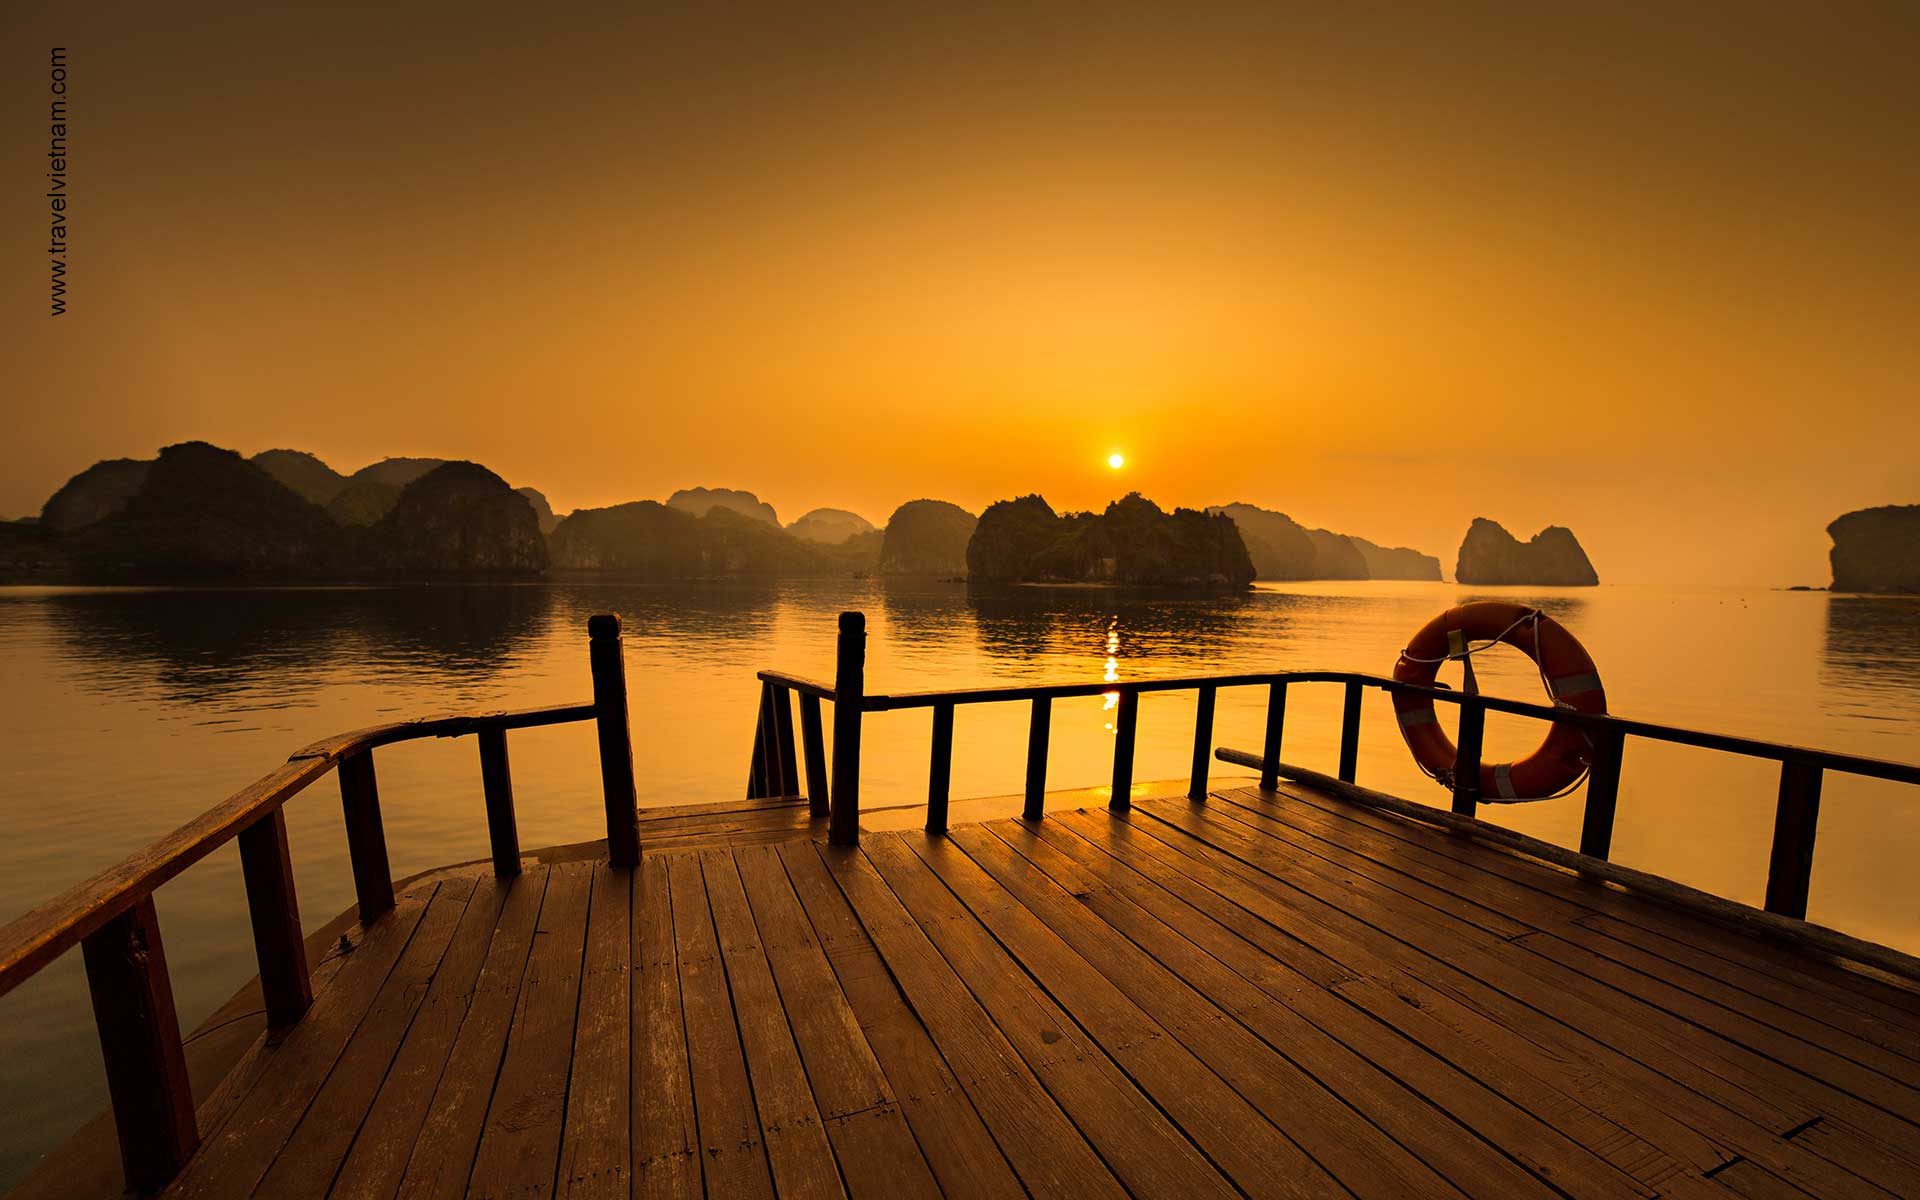 When Is the Best Time to Visit Halong Bay?